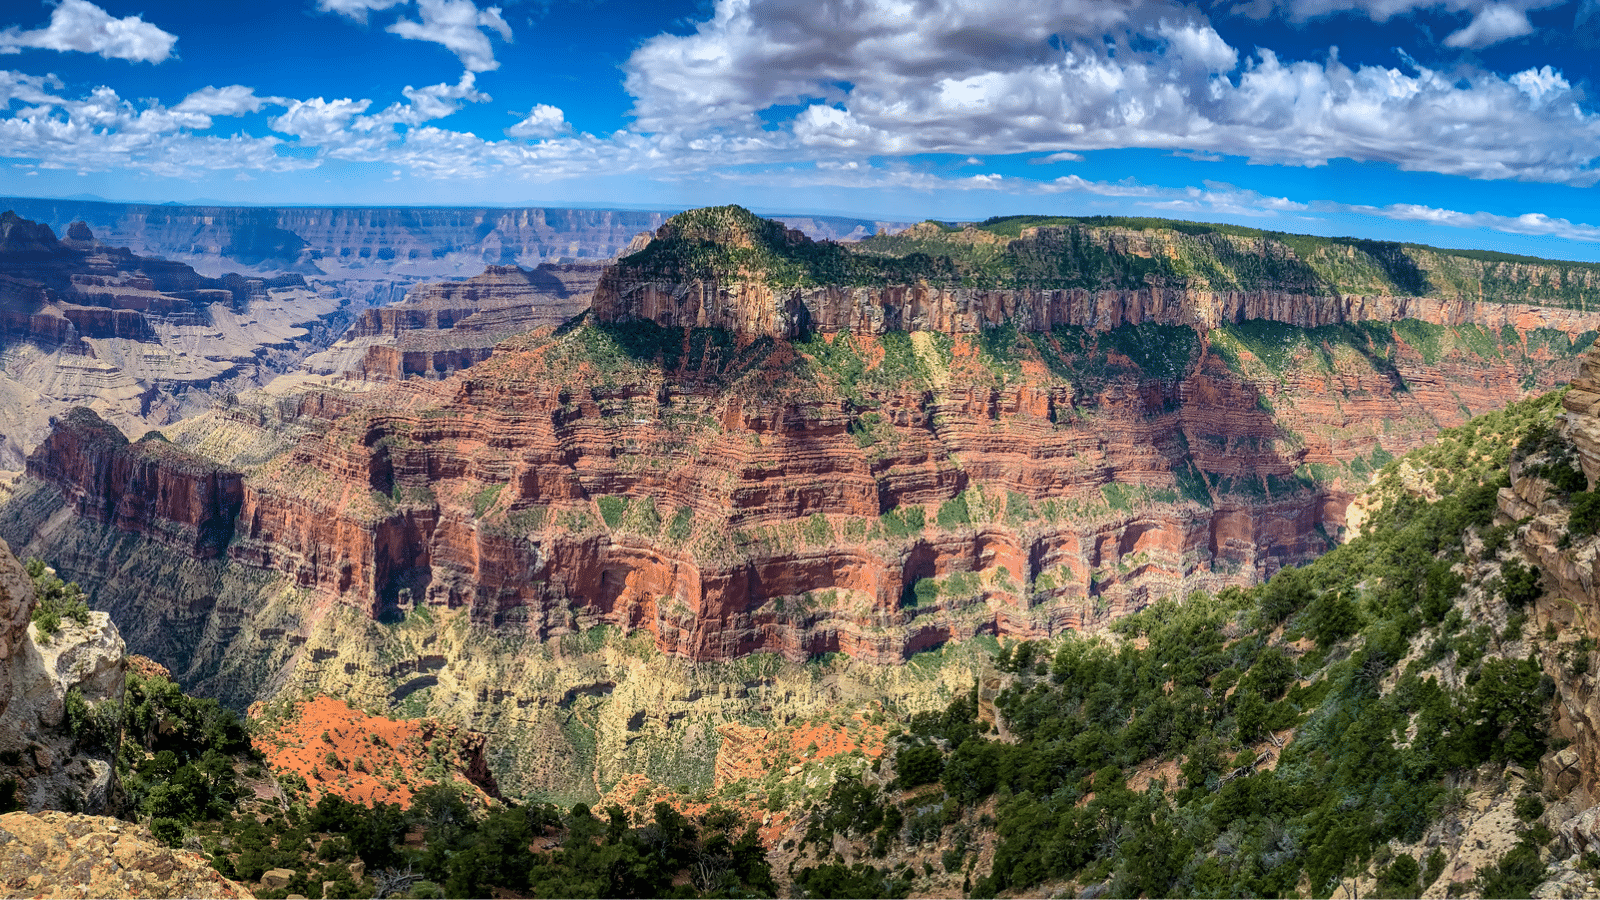 <p><span>Imagine visiting a place where 1.2 billion-year-old rocks are right next to 250 million-year-old rocks. Extending 277 miles, the Grand Canyon is an incredible tourist attraction and one of the Seven Natural Wonders of the World. Its immense size and beautiful layers of red rock create a beautiful and incredibly humbling landscape. </span></p>